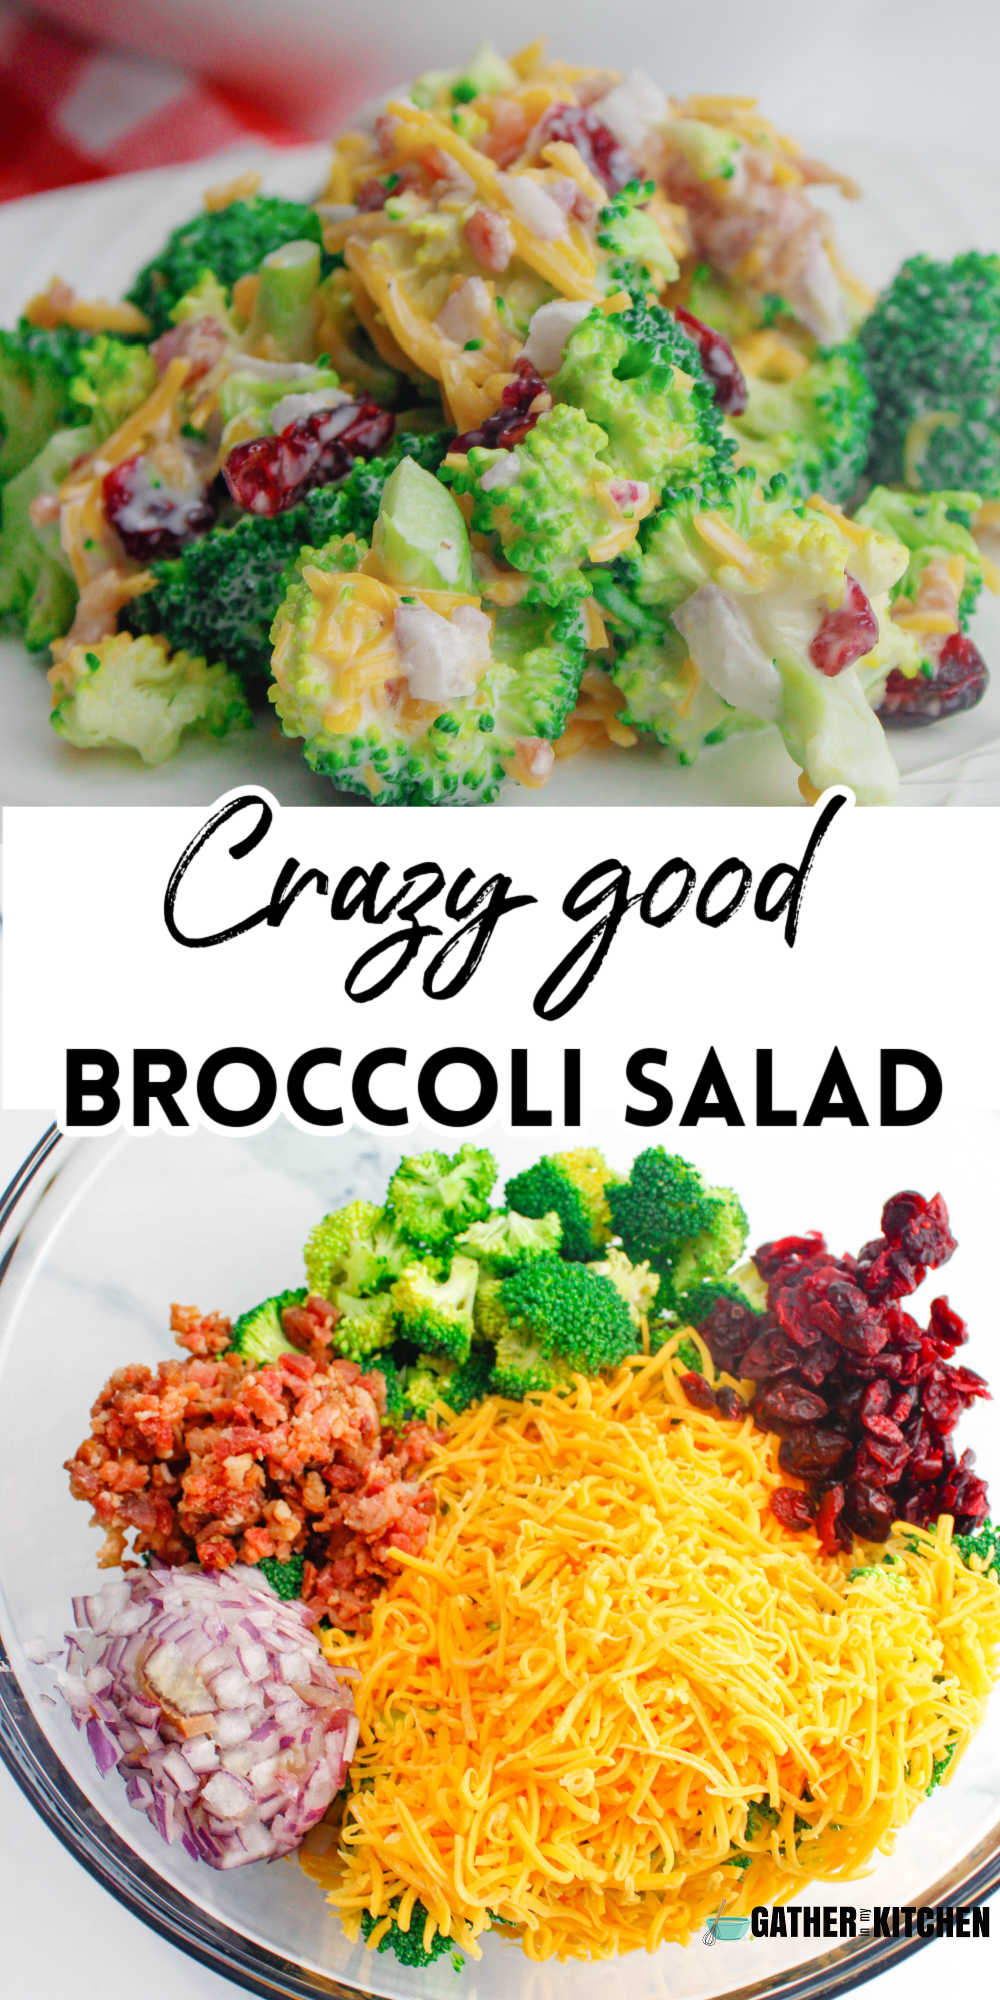 Pin image collage: top has broccoli salad on plate, middle says "crazy good broccoli salad" and bottom has ingredients in a bowl.